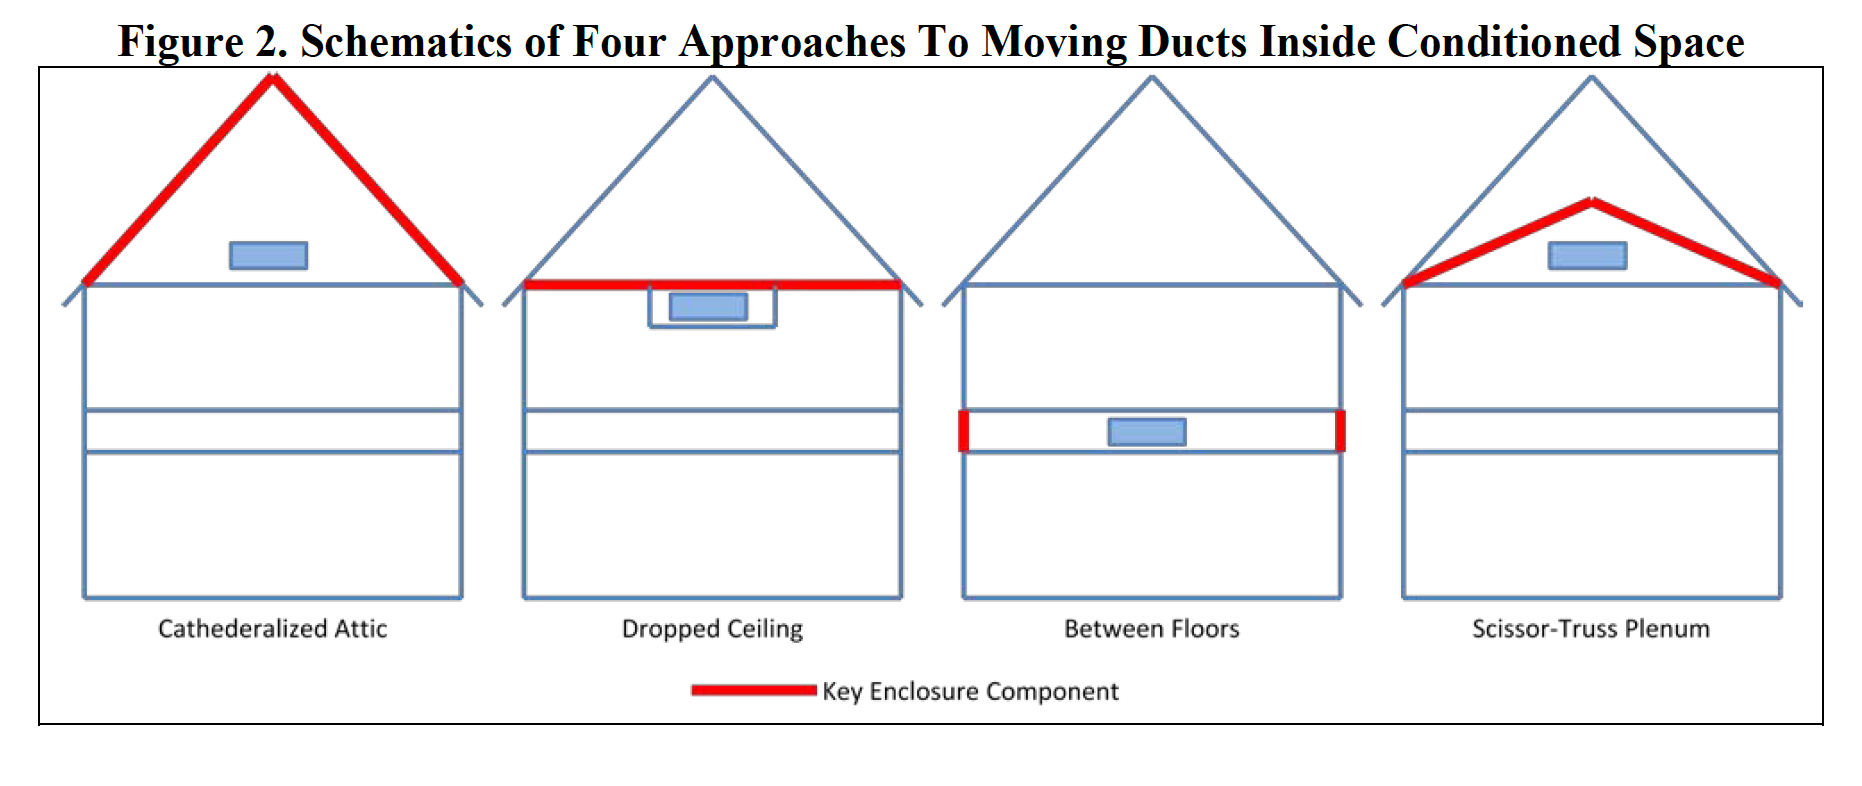 4 ways to get ducts inside the conditioned space, from the paper by Dave Roberts and Jon Winkler